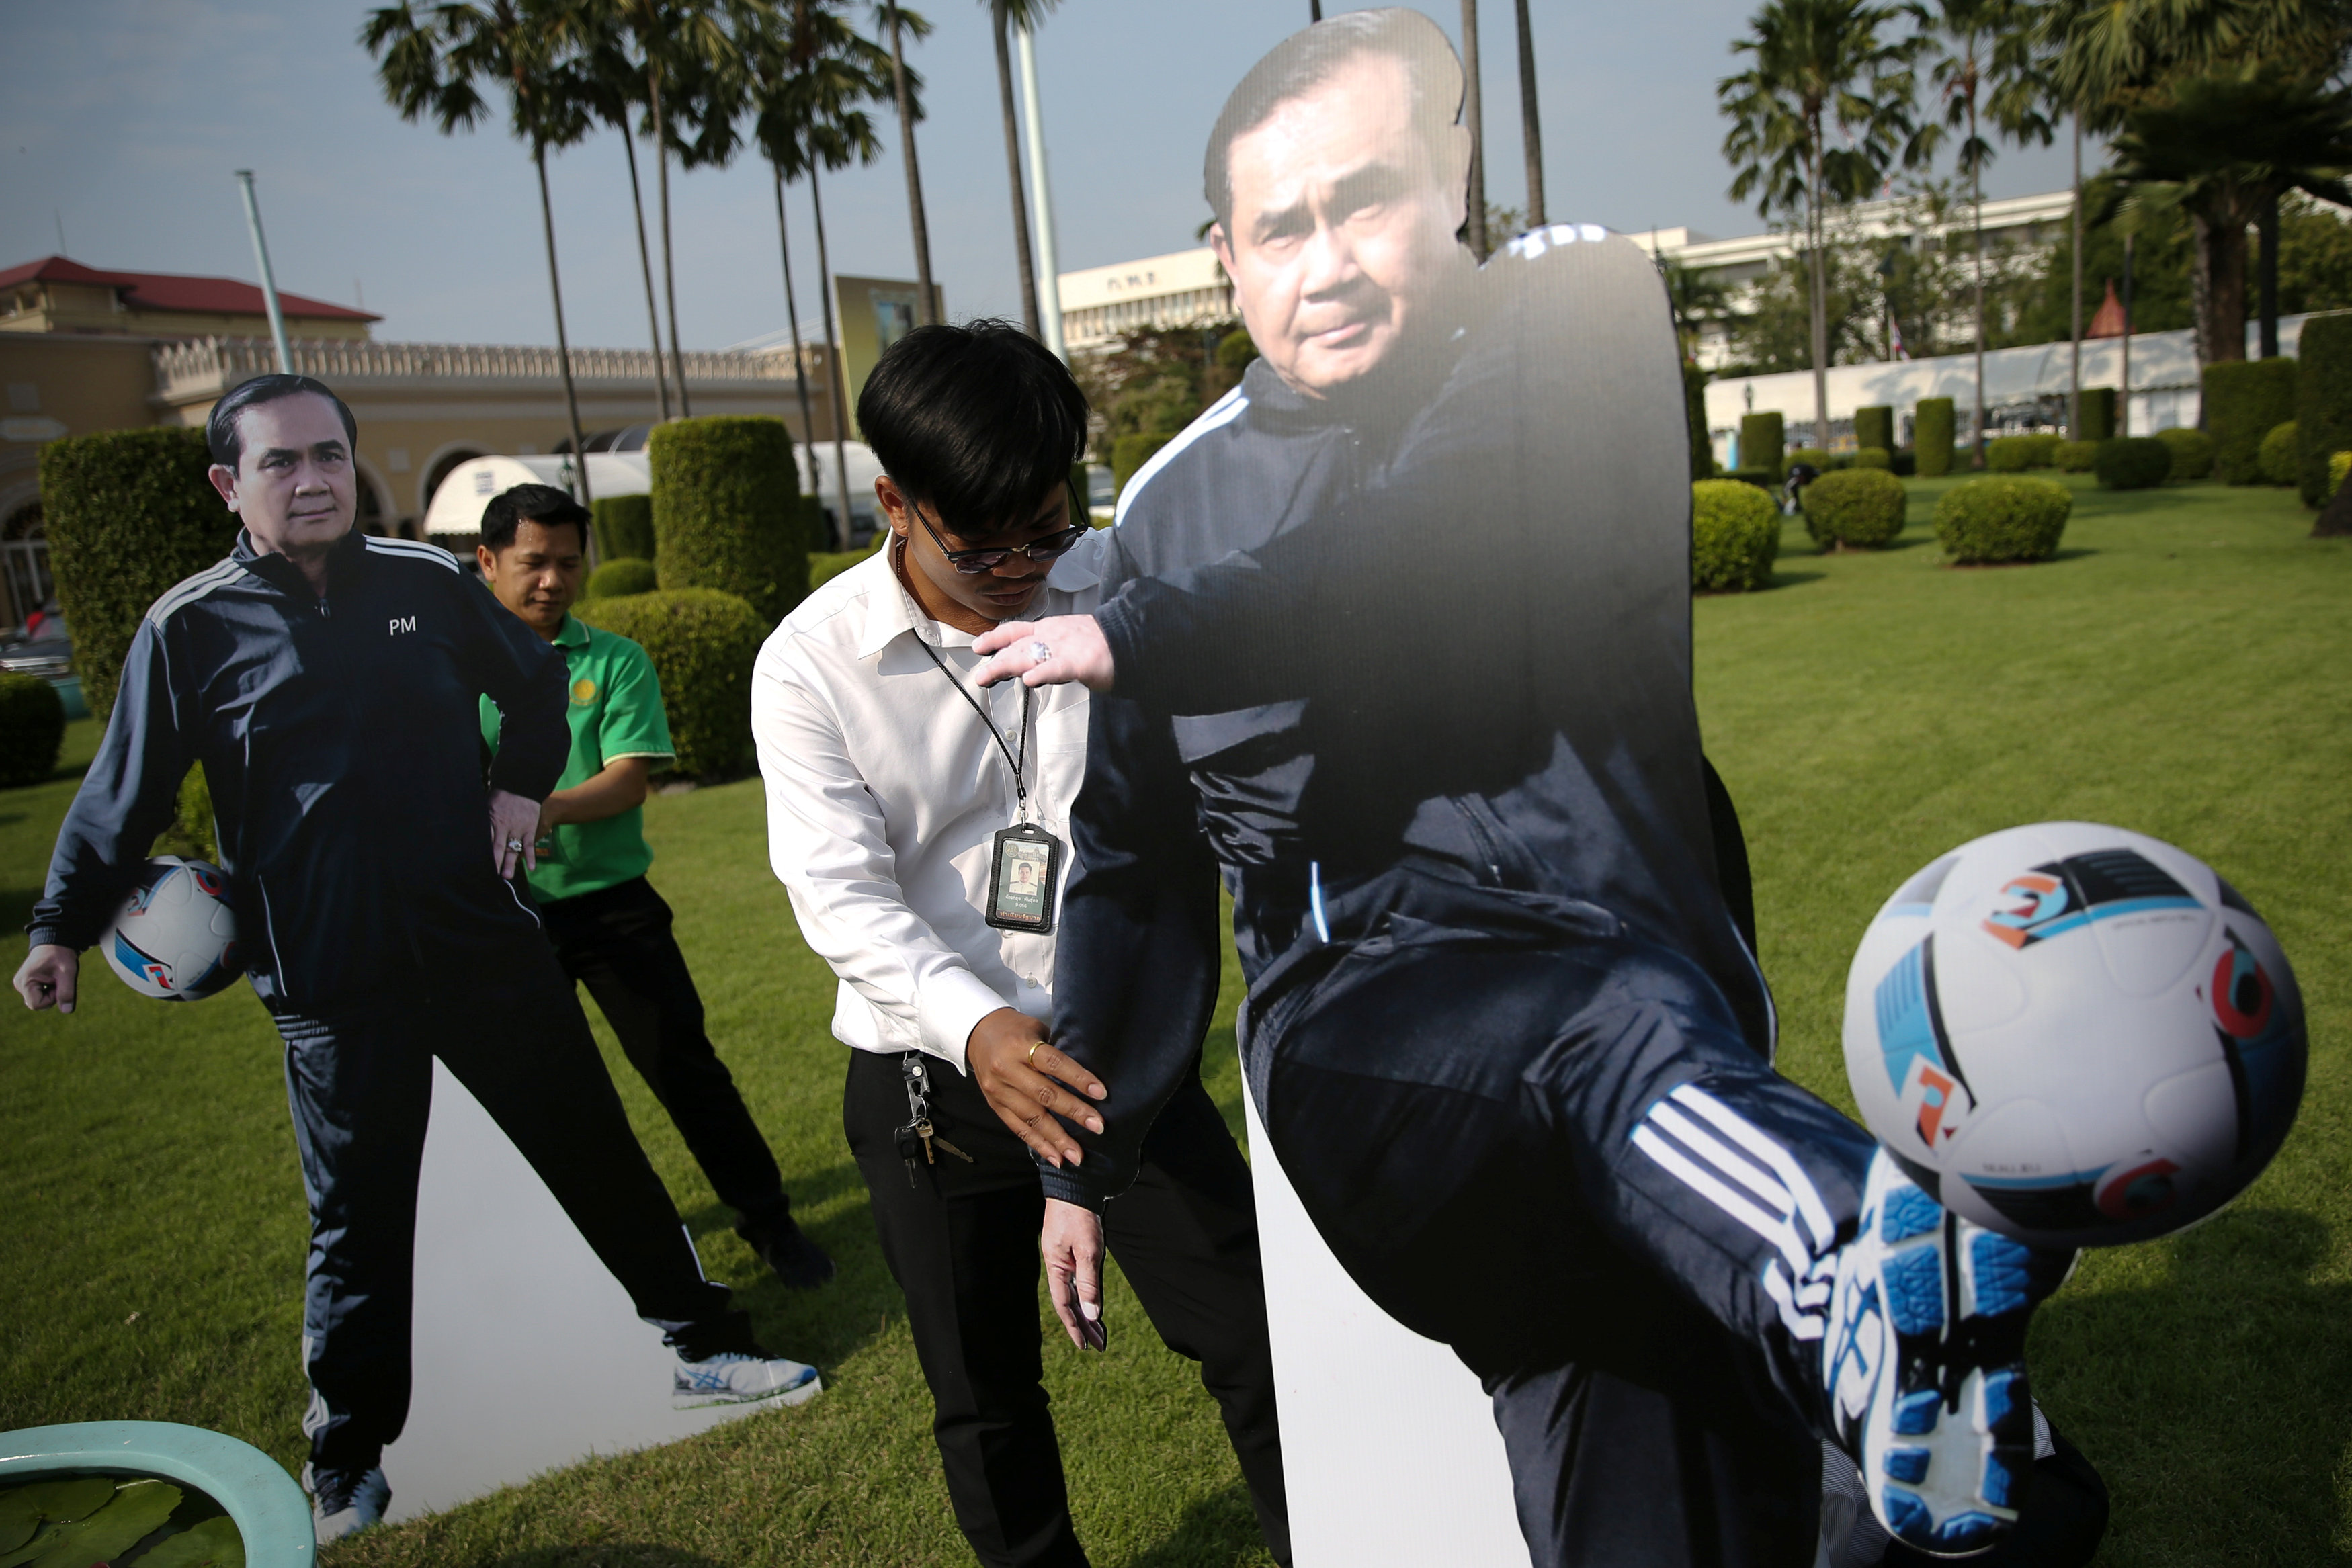 Thailand's prime minister cutouts a highlight of Children's Day